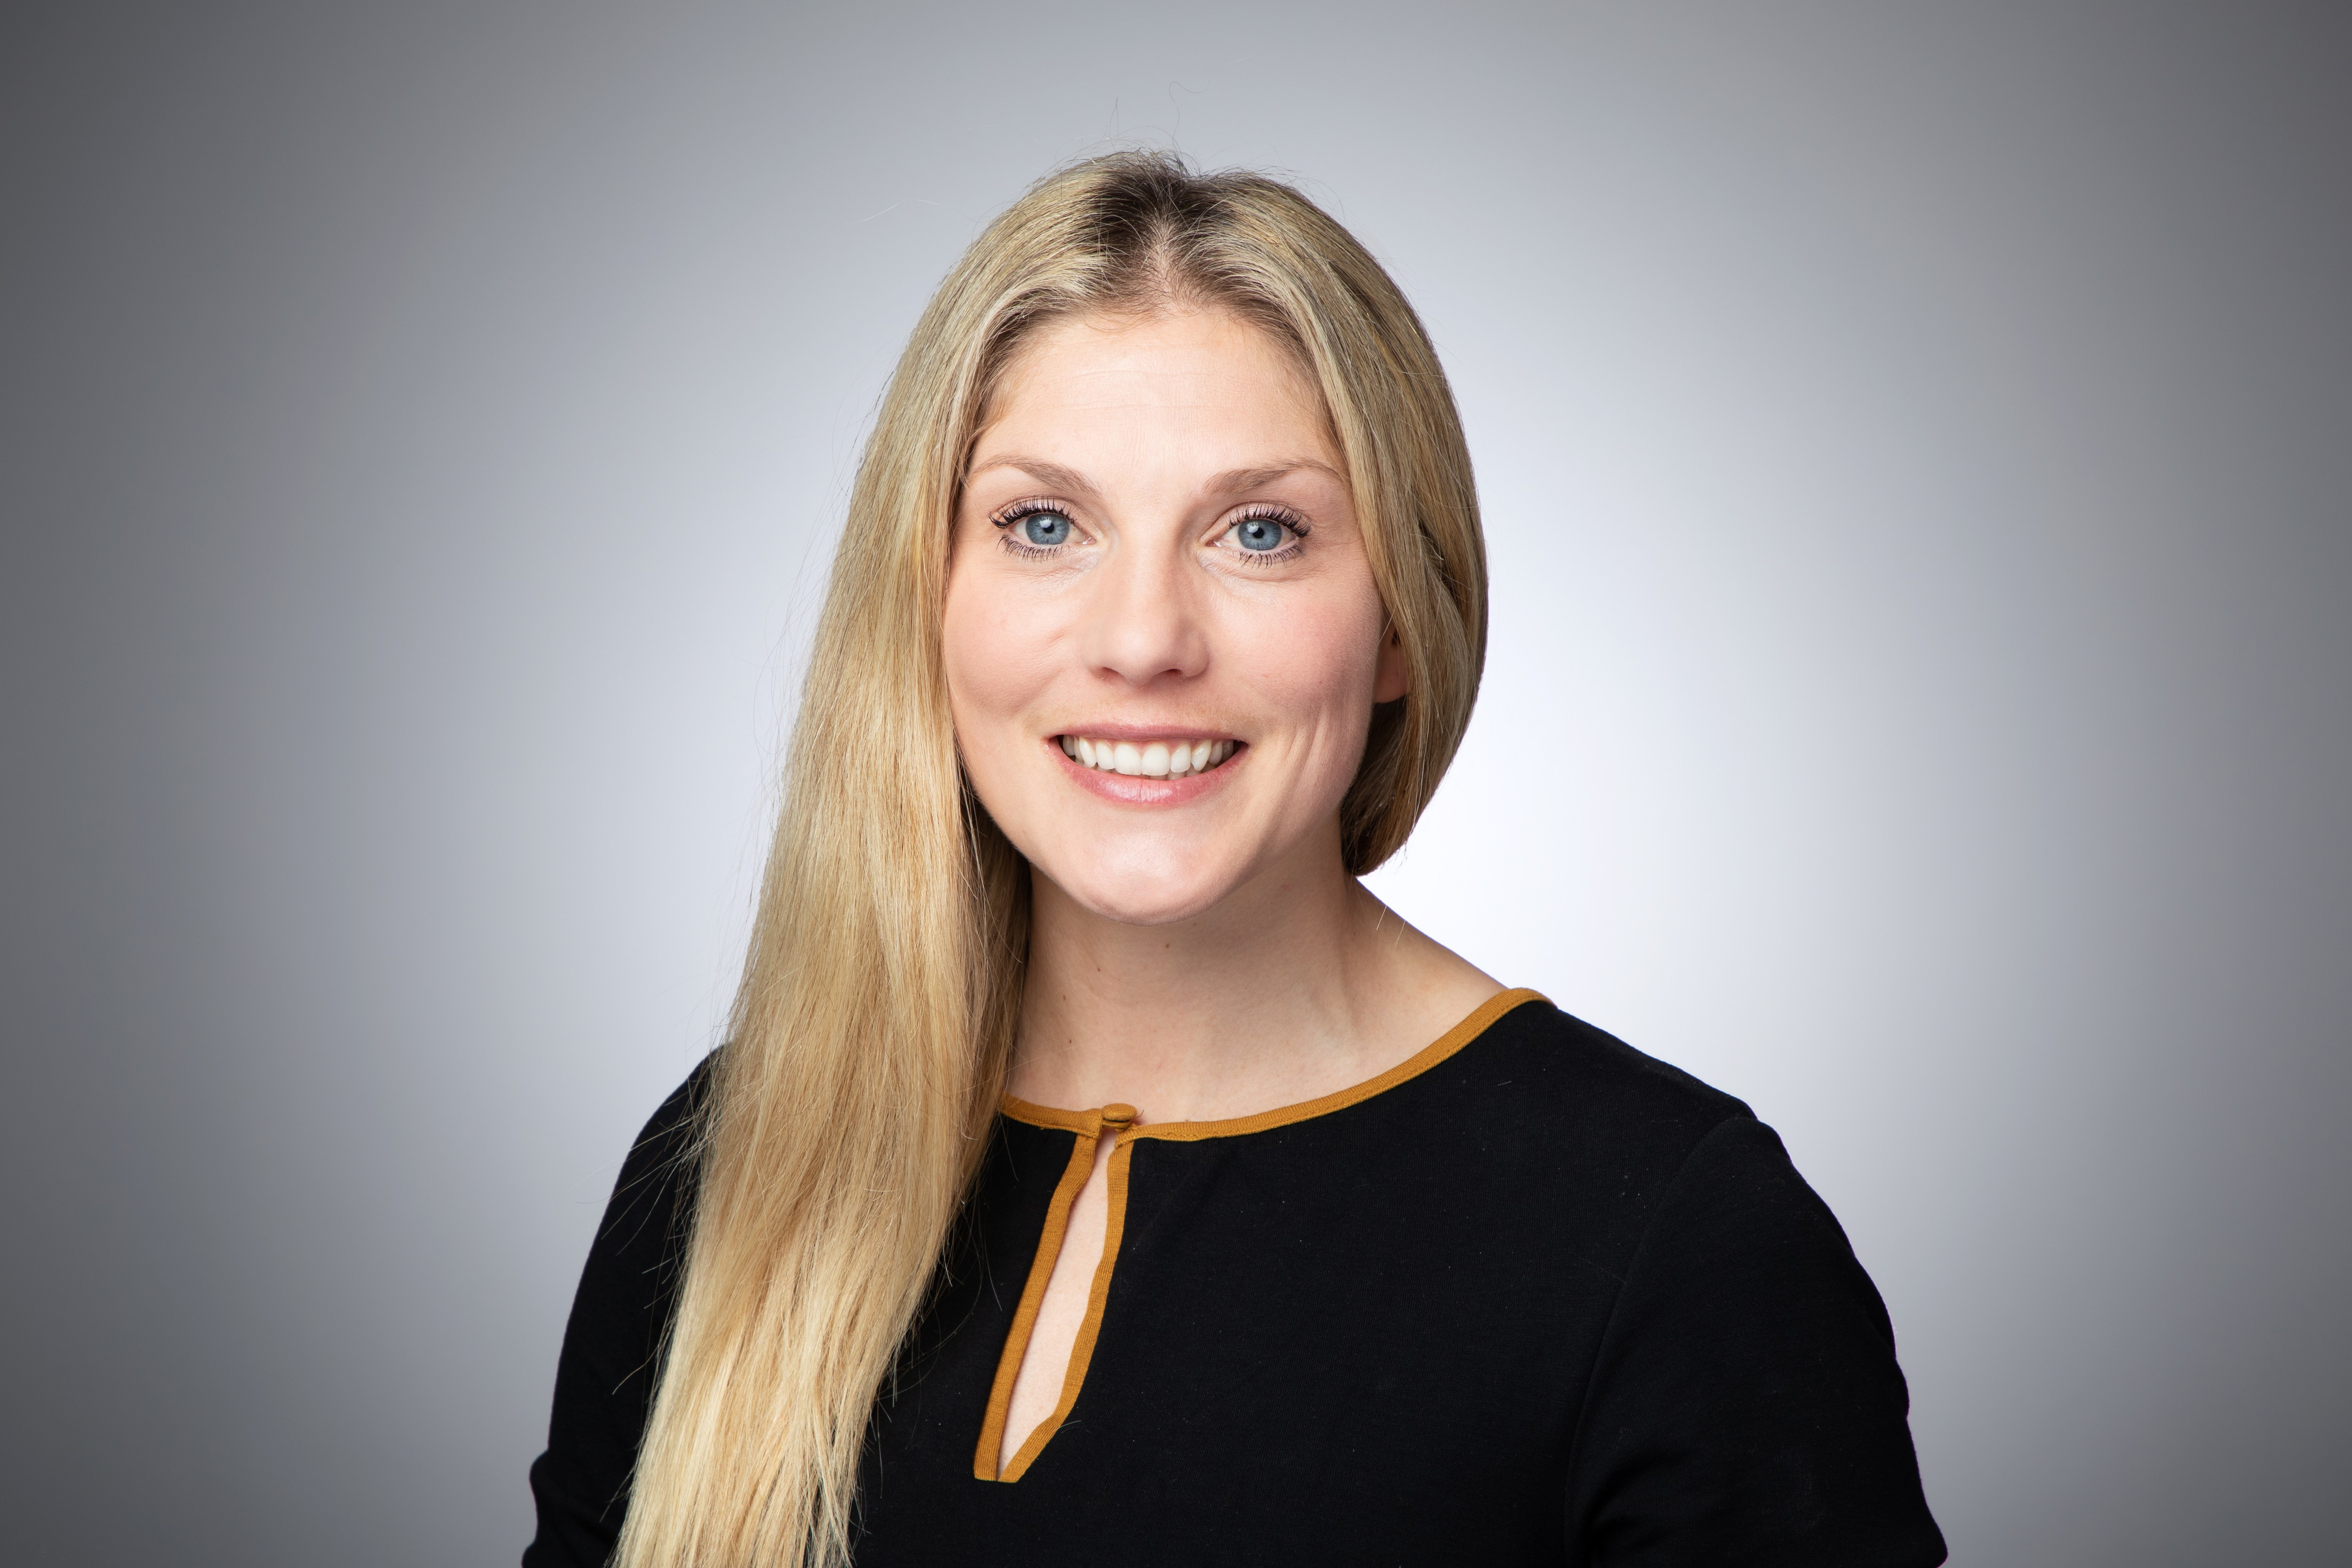 Emily Chalkley is a senior associate at the law firm Charles Russell Speechlys